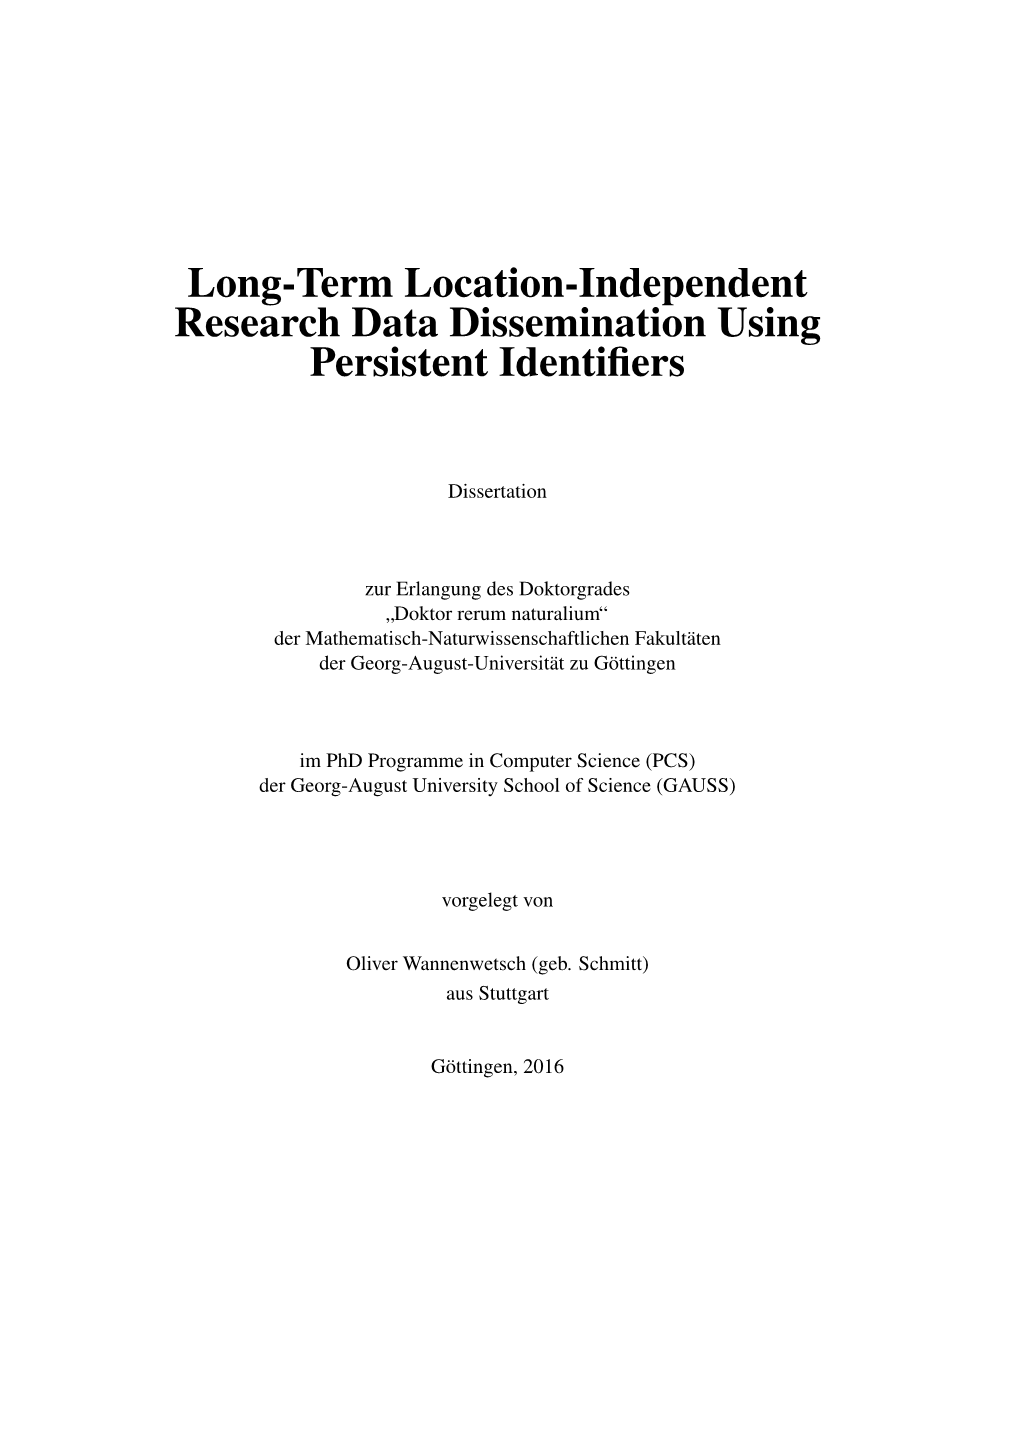 Long-Term Location-Independent Research Data Dissemination Using Persistent Identiﬁers